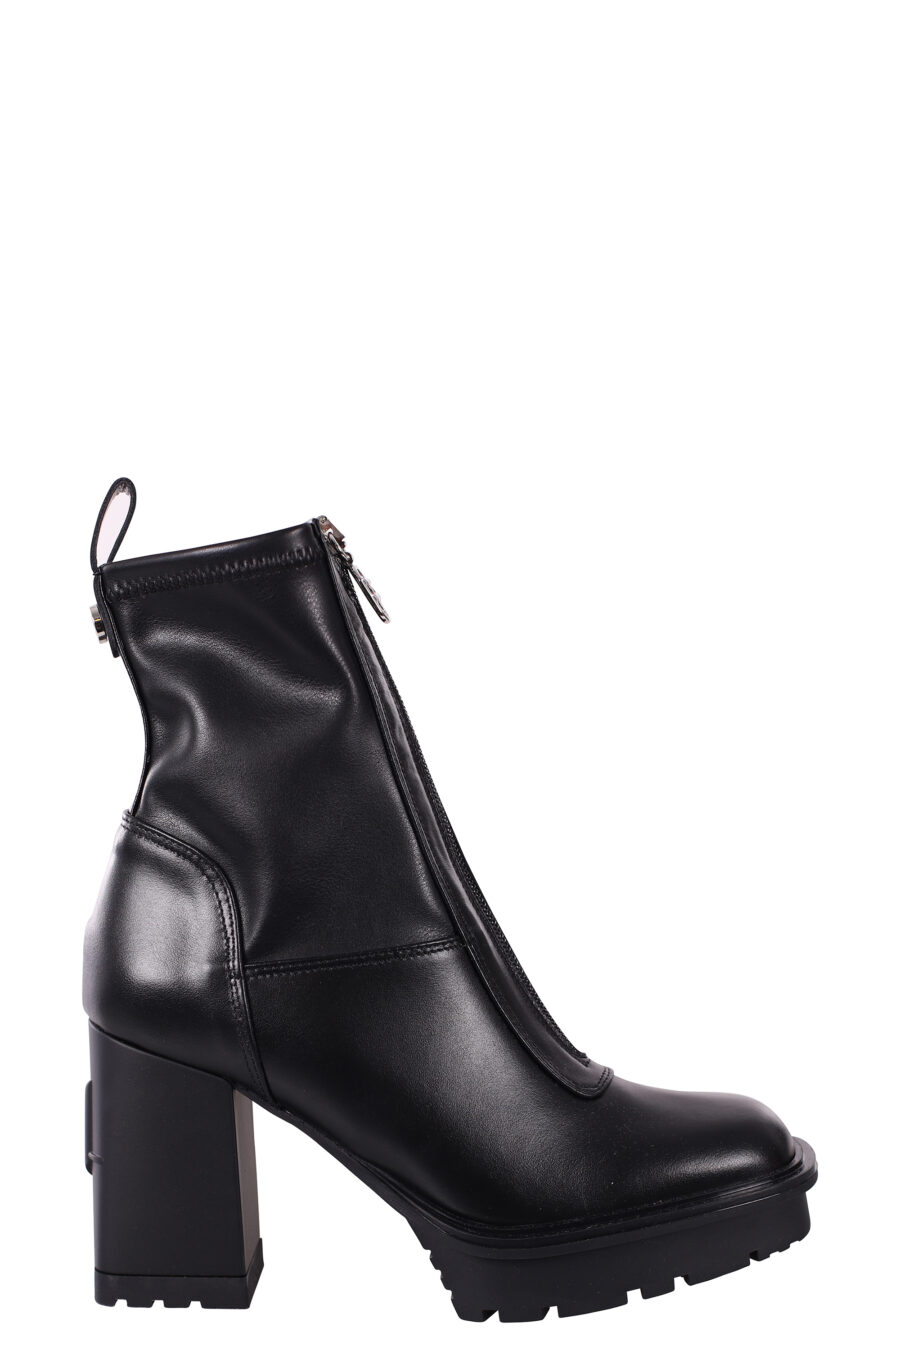 Black sock ankle boots with heel and platform - IMG 5809